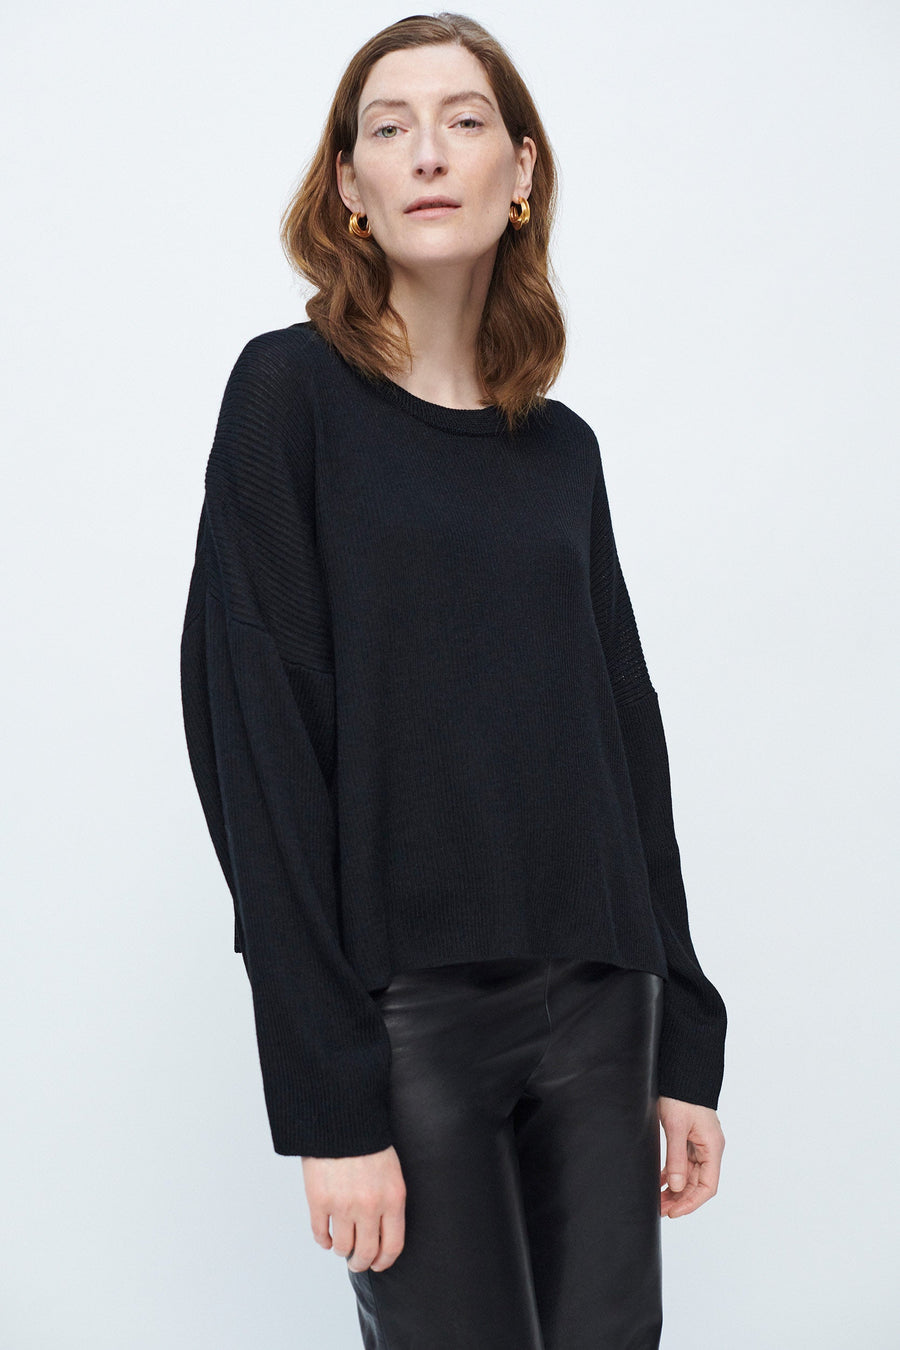 Model wearing AQVAROSSA Kenitra boxy sweater in black colour extra fine baby alpaca front view